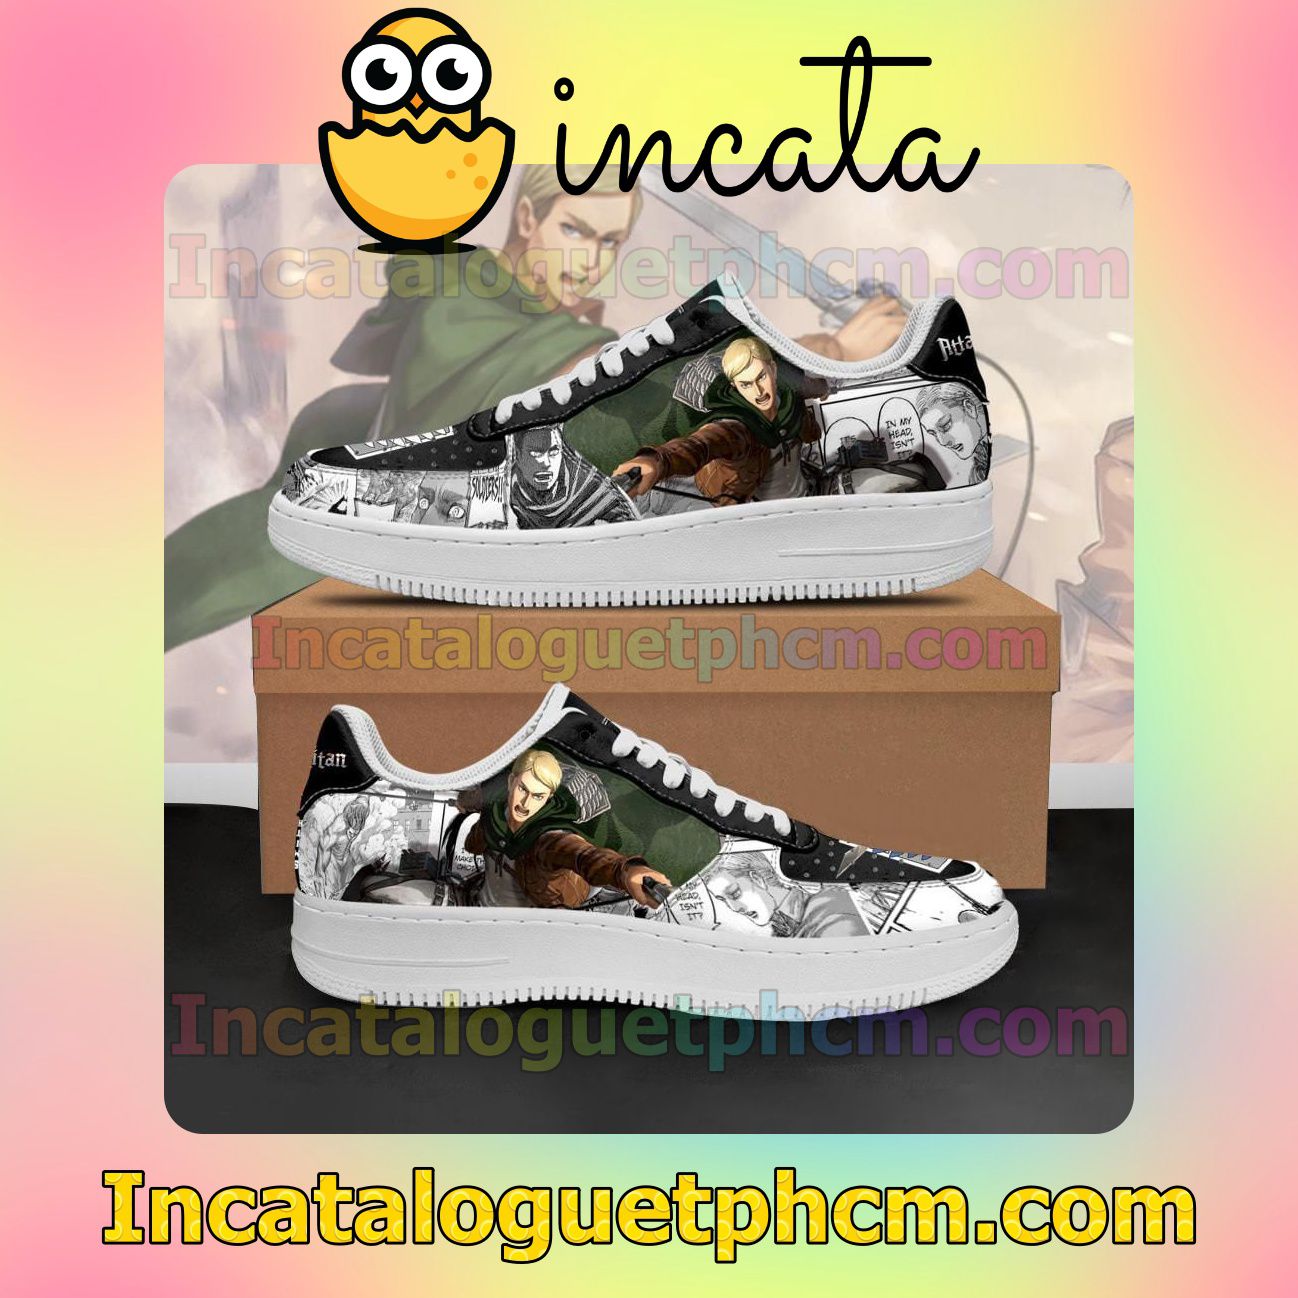 AOT Scout Erwin Attack On Titan Anime Mixed Manga Nike Low Shoes Sneakers